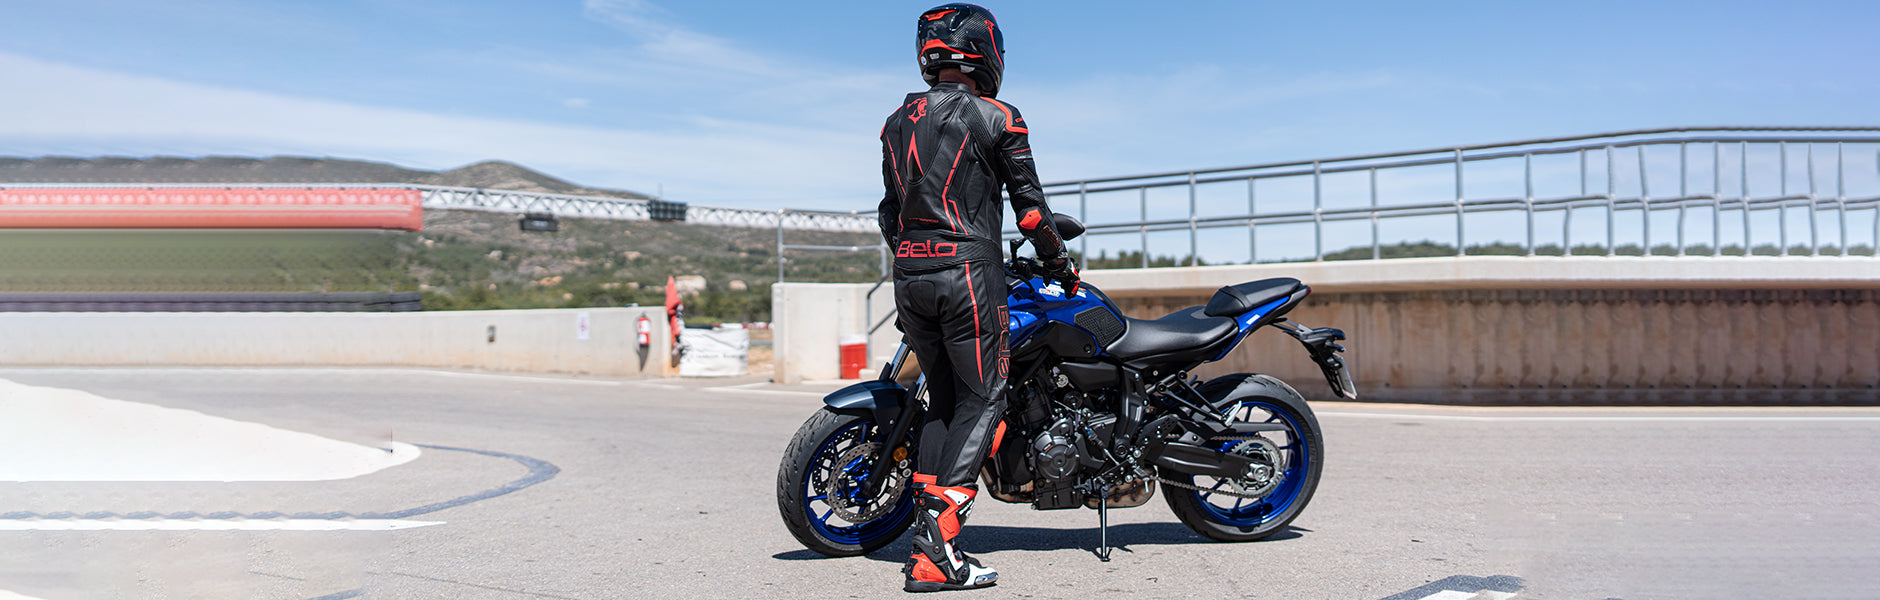 outfitted bela one piece motorcycle suit while riding on  suzuki R g5s